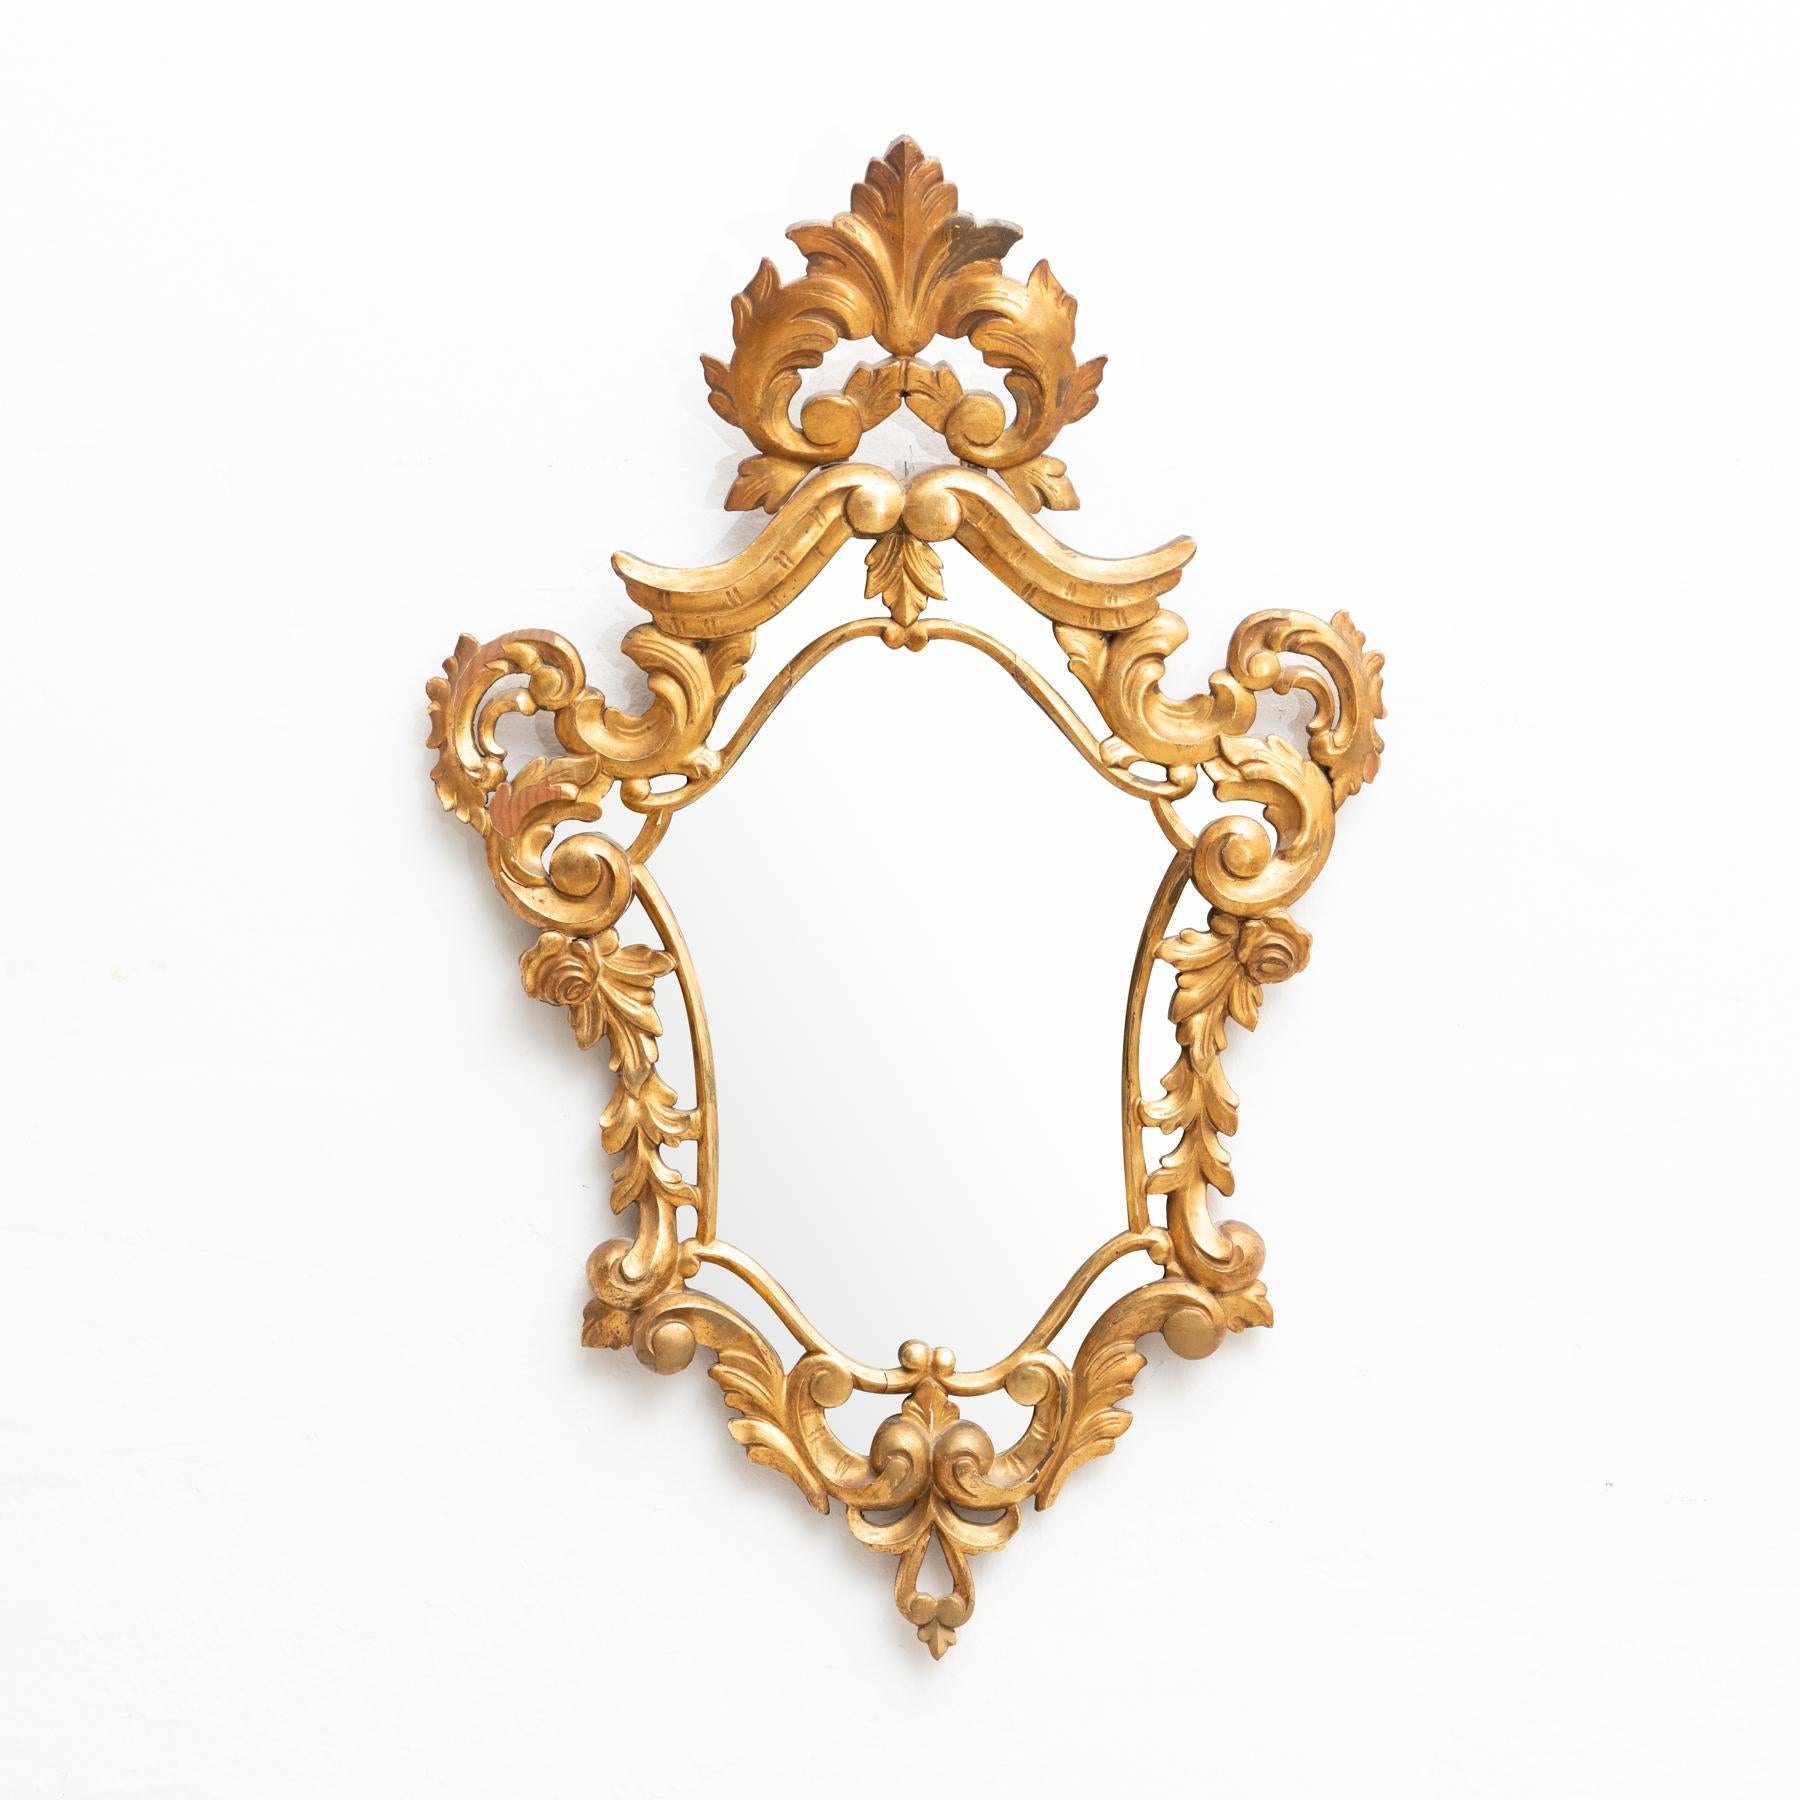 Antique gold cornucopia mirror.
By unknown manufacturer from France, circa S.XIX.

In original condition, with minor wear consistent with age and use, preserving a beautiful patina.

Materials:
Mirror
Wood.

